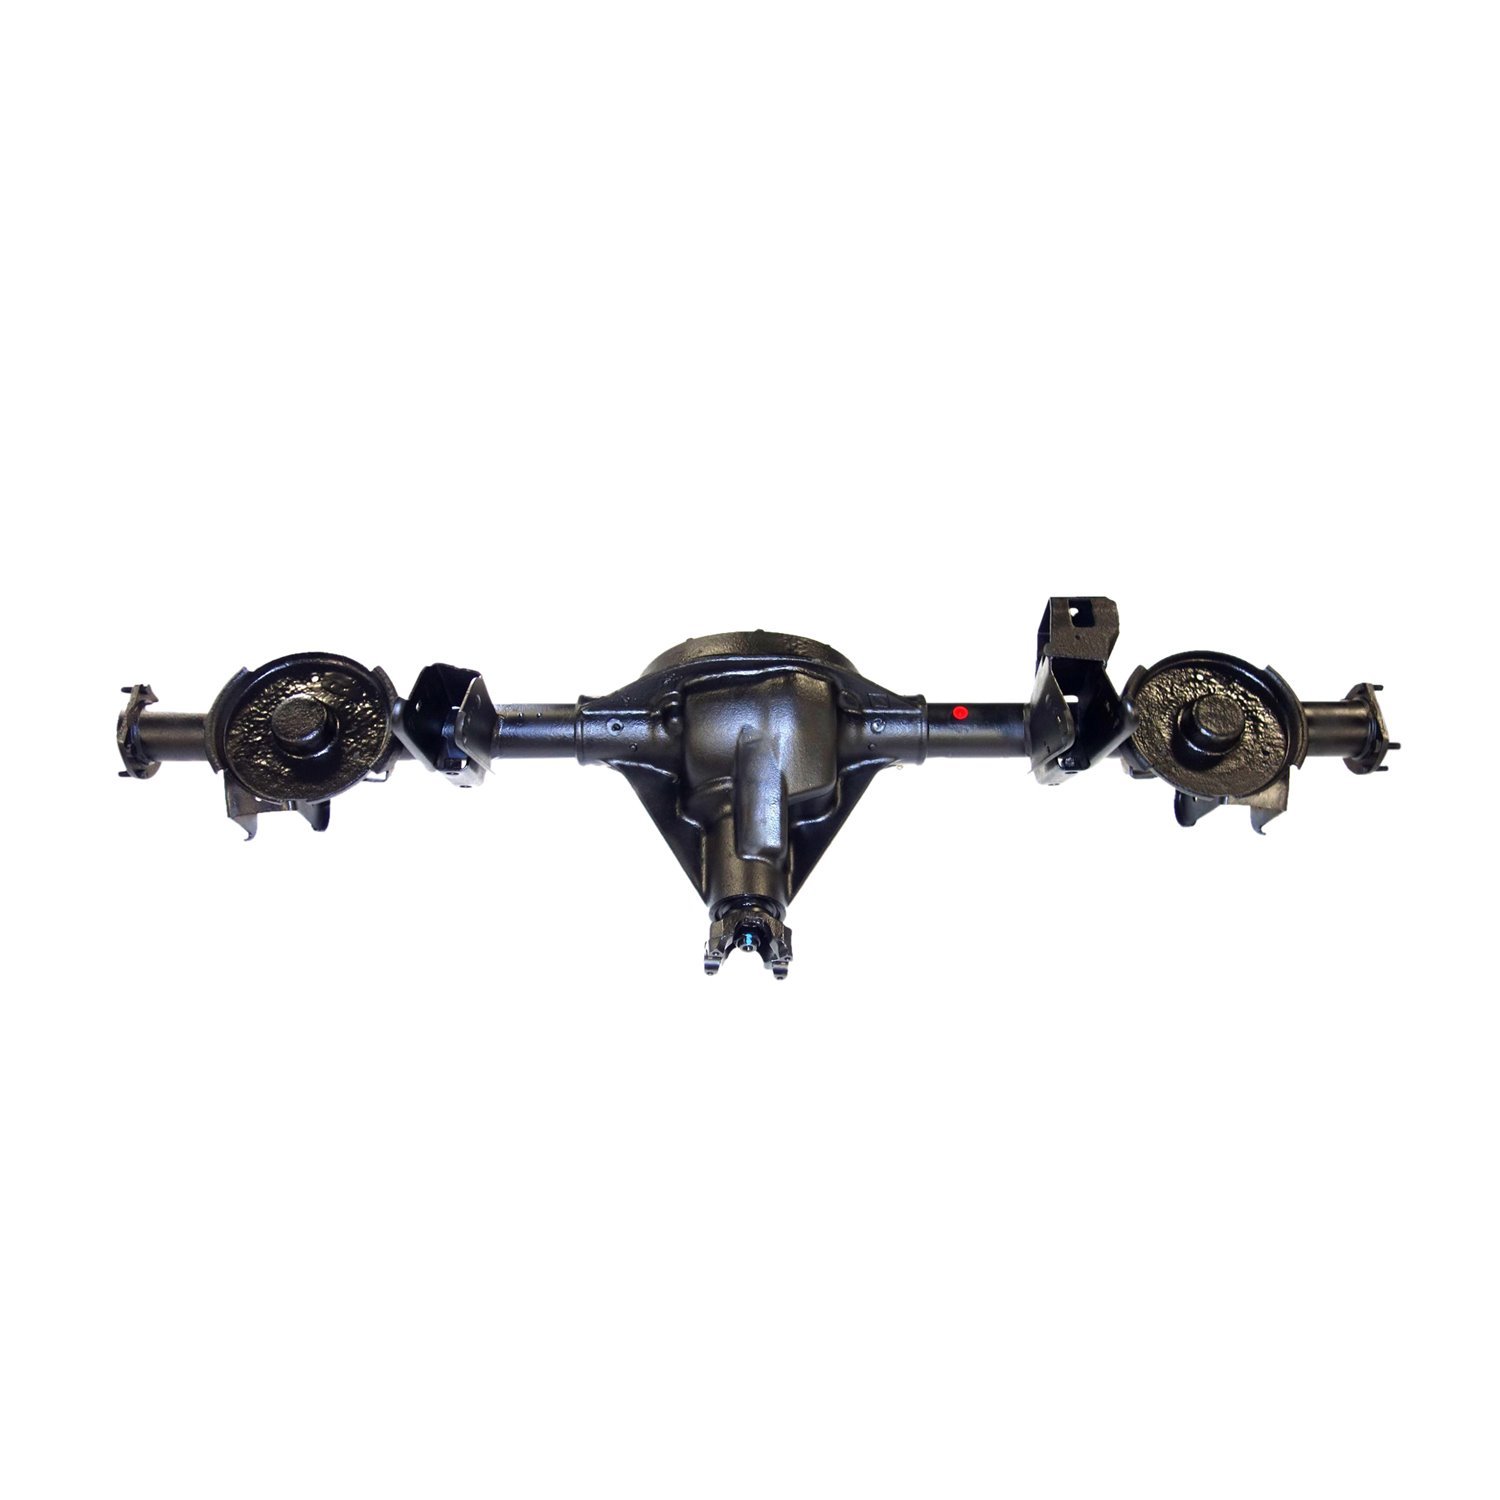 Remanufactured Complete Axle Assembly for Dana 35 97-02 Jeep Wrangler 3.55 Ratio w/o ABS